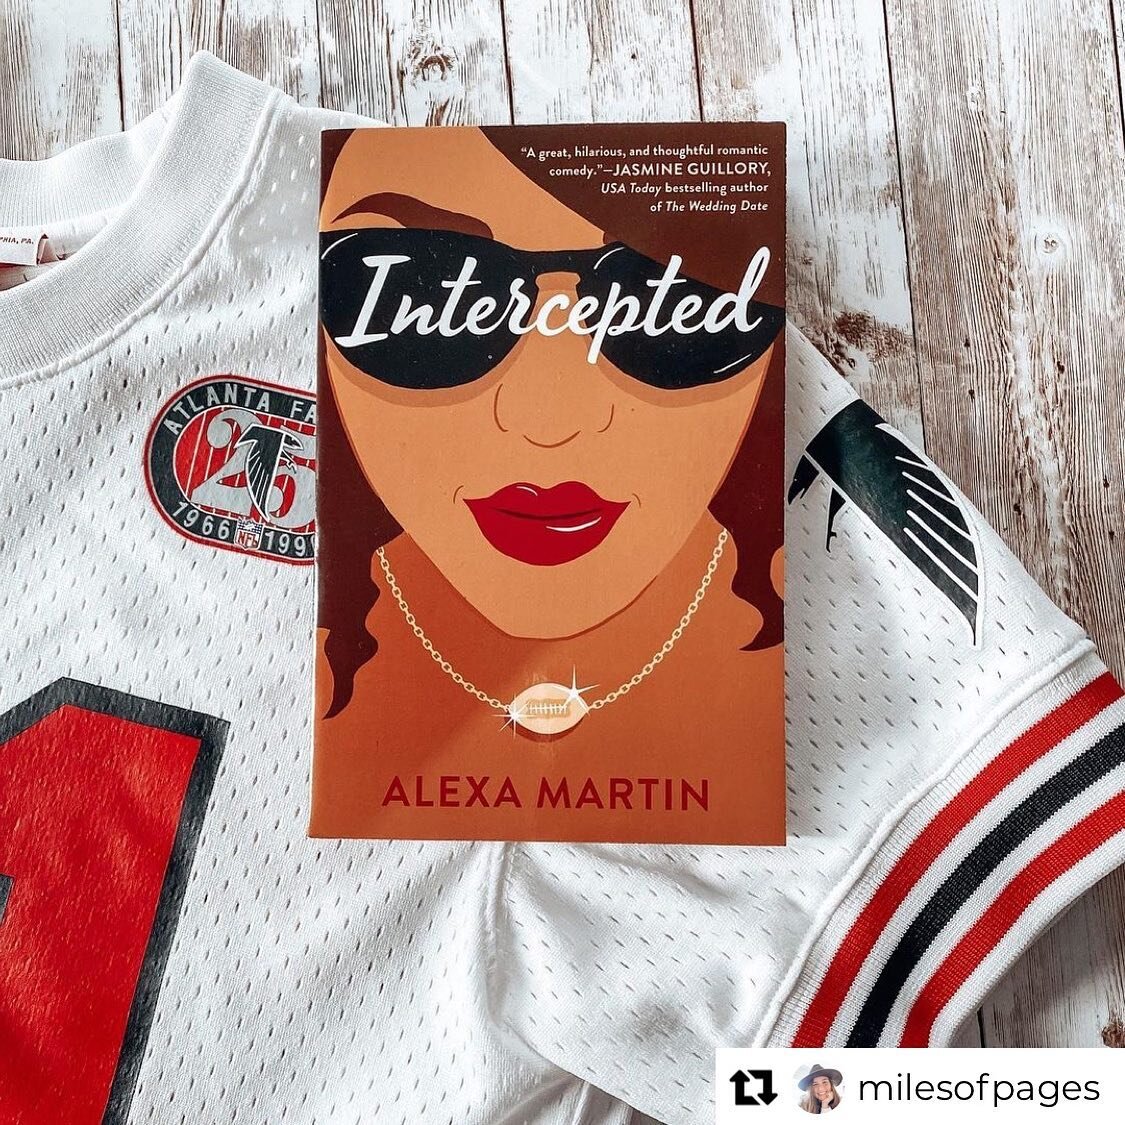 There&rsquo;s not much that makes me happier than seeing people discover Intercepted! Marlee and Gavin were the first characters I&rsquo;ve ever created and I have such a soft spot for them. 😍I can&rsquo;t believe it&rsquo;s almost been 3 years sinc